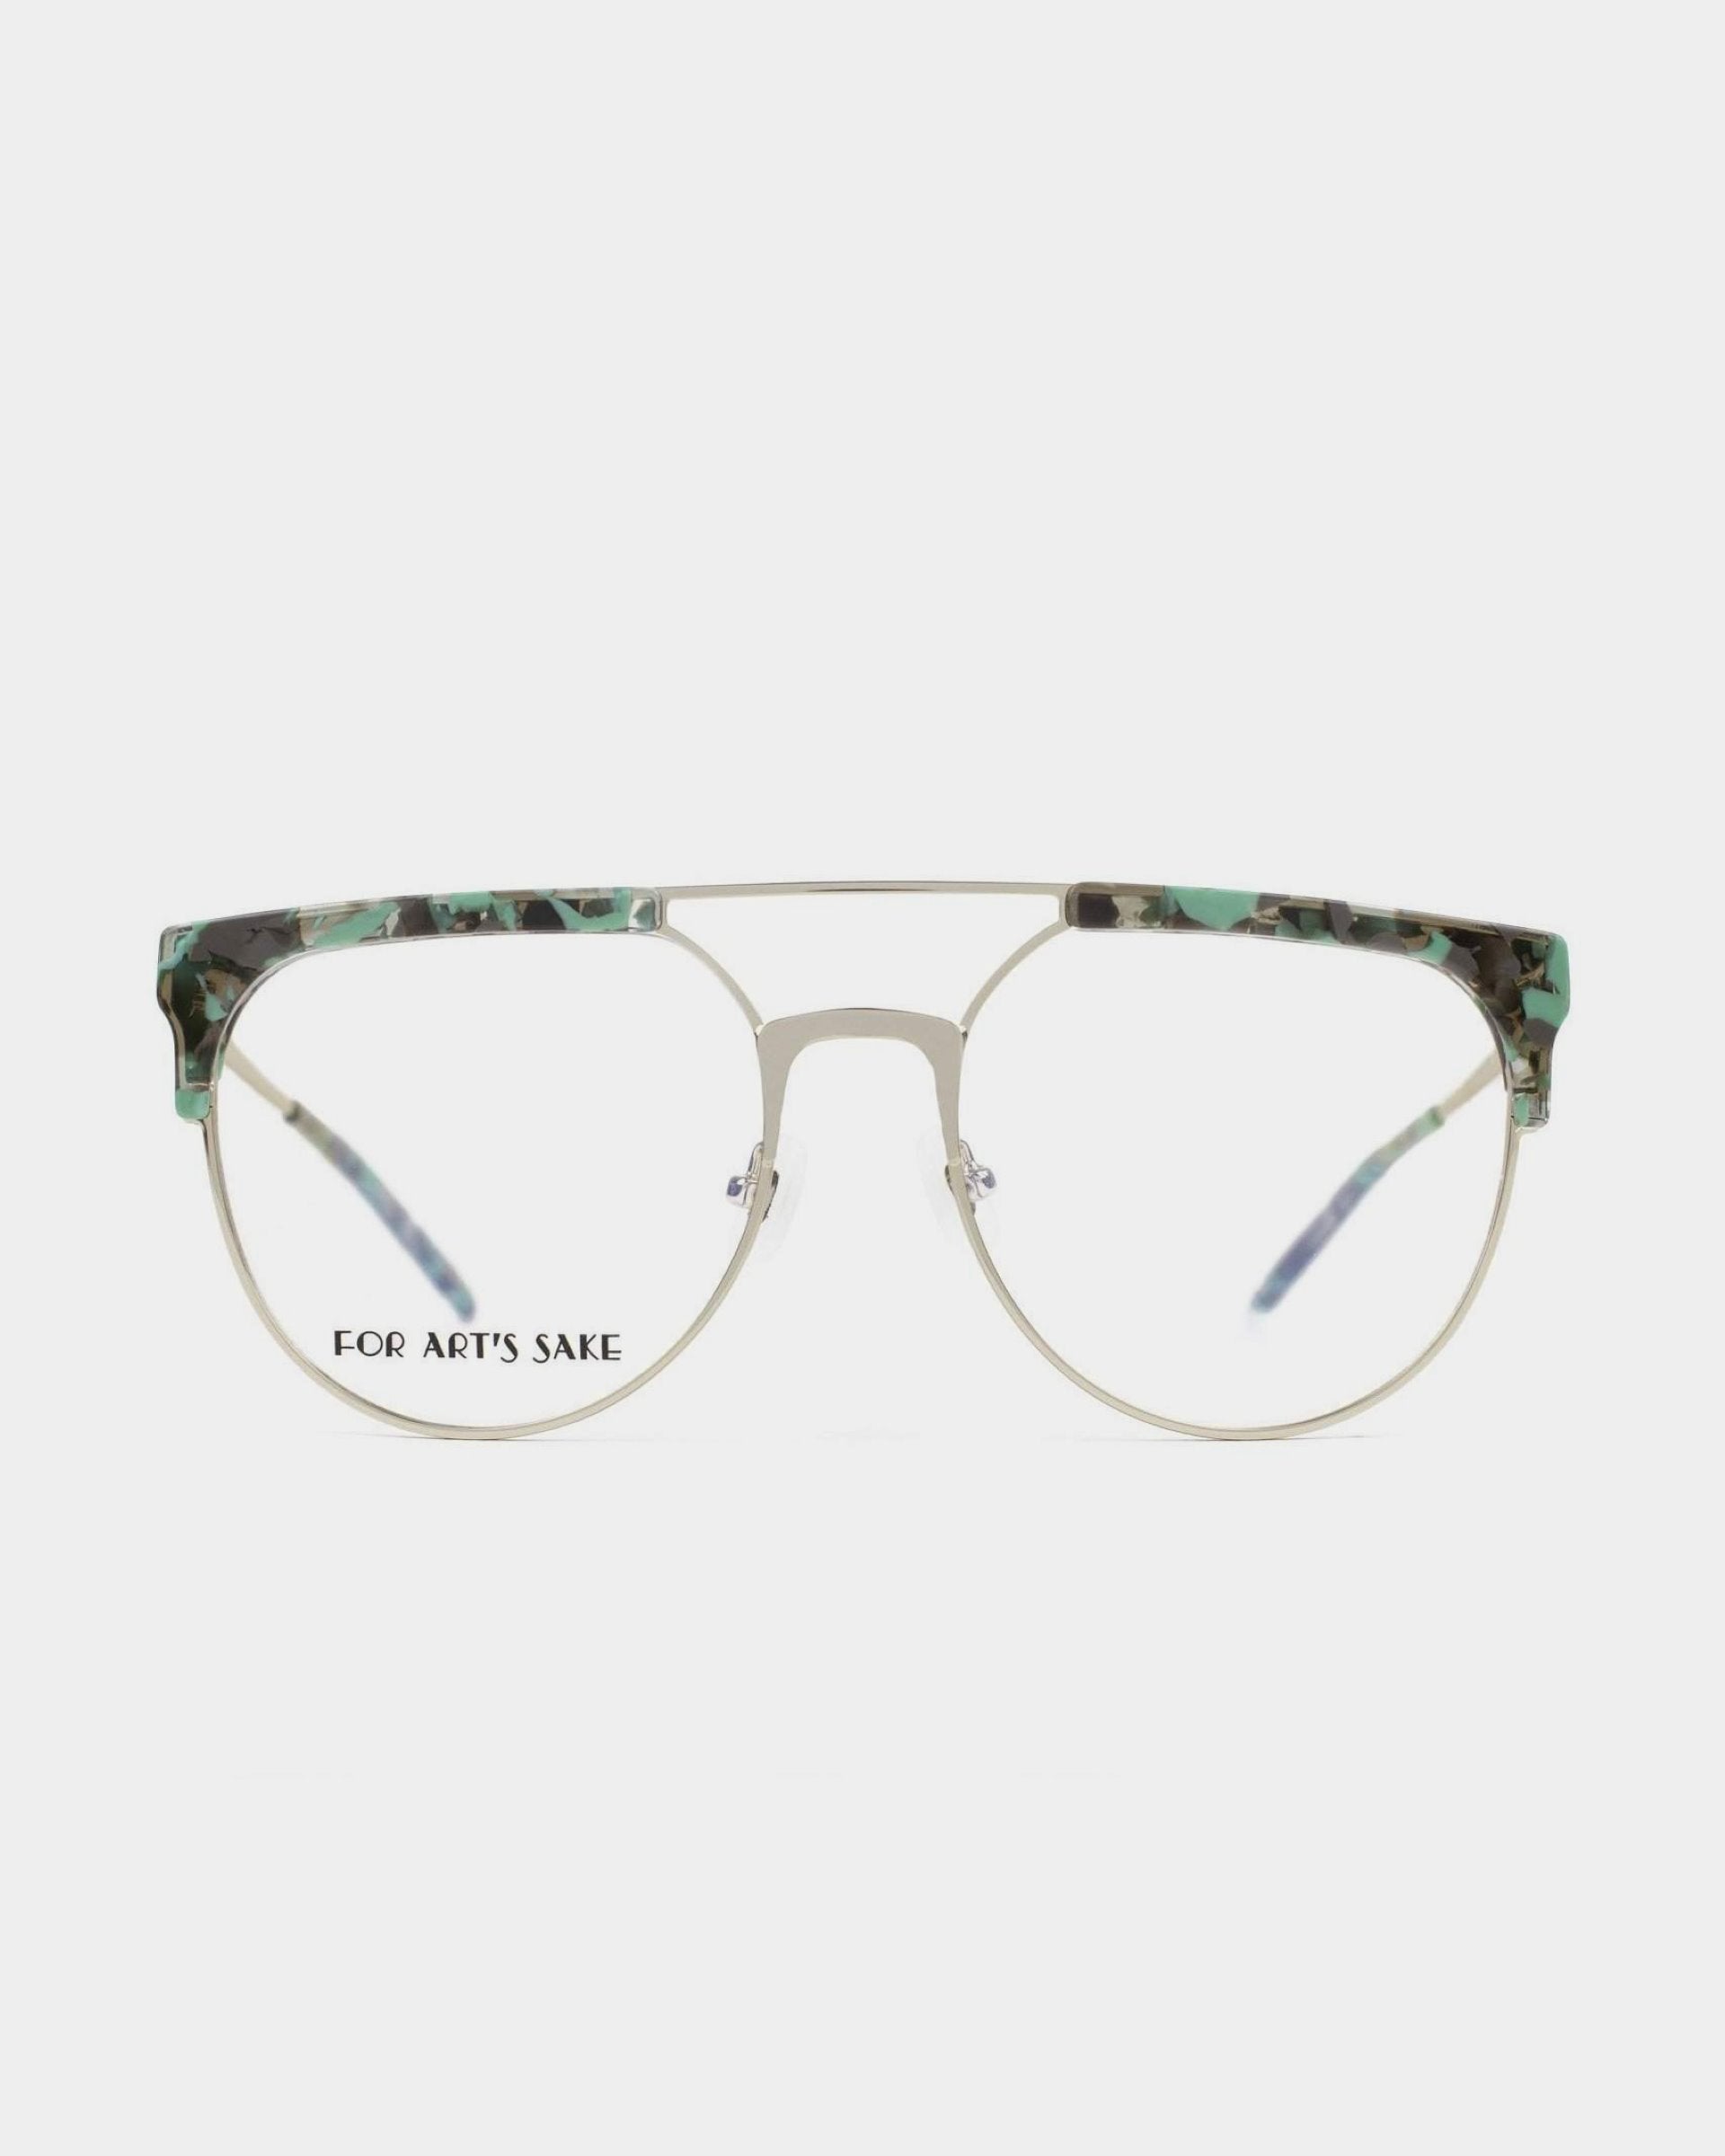 A pair of Frosty prescription glasses from For Art&#39;s Sake® with a green tortoiseshell pattern on the brow bar and temple tips. The frame boasts a double bridge design and clear lenses with UV protection. The text &quot;FOR ART&#39;S SAKE&quot; is visible on the left lens against a plain white background.